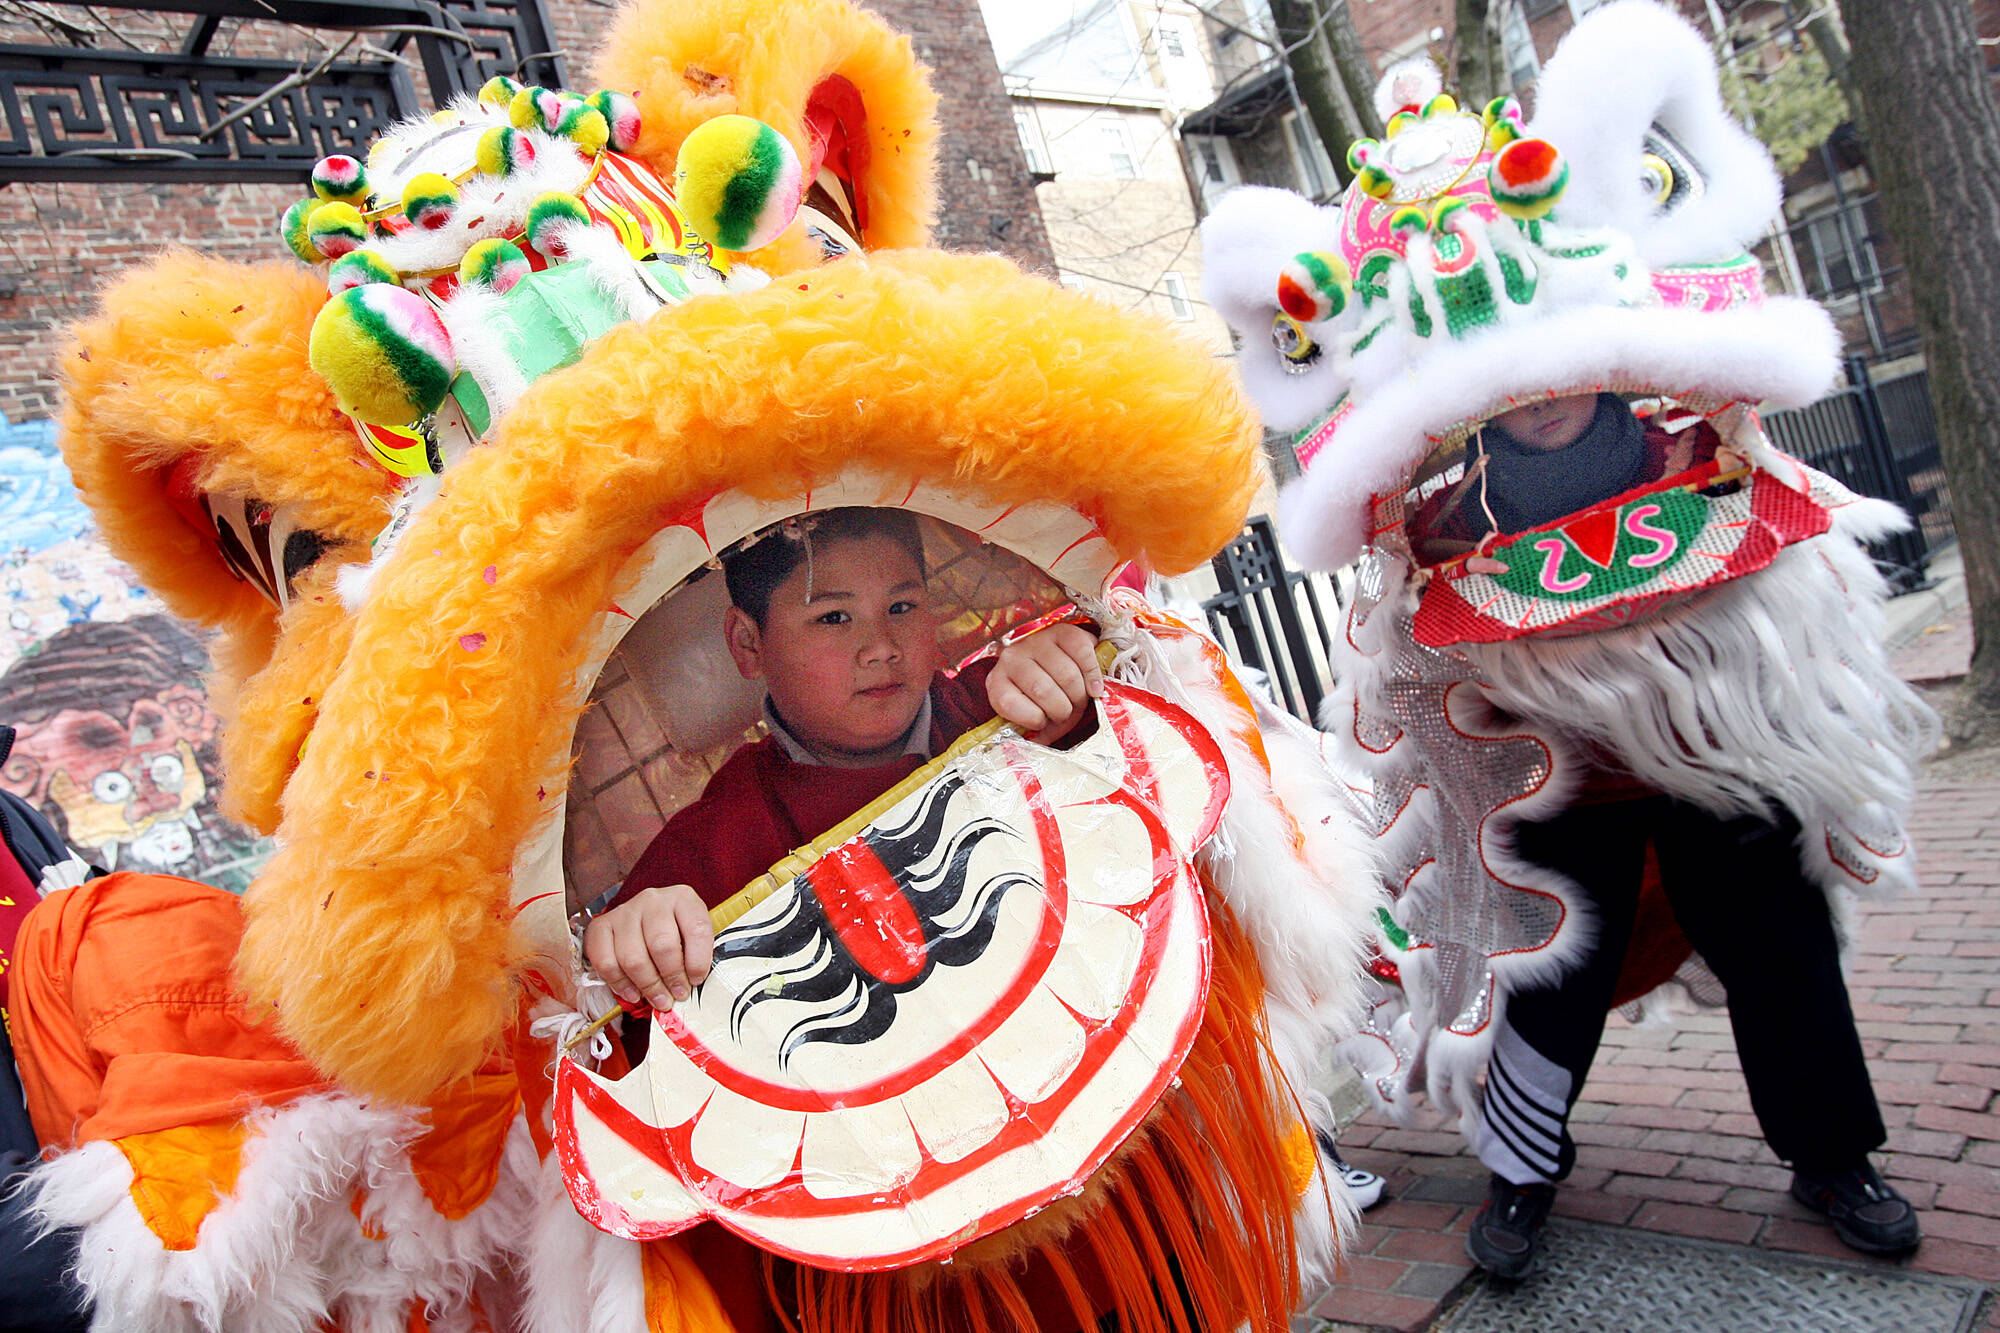 A child prepares to perform a lion dance during Lunar New Year Celebrations in Chinatown on Feb. 17, 2008. (Angela Rowlings/MediaNews Group/Boston Herald via Getty Images)